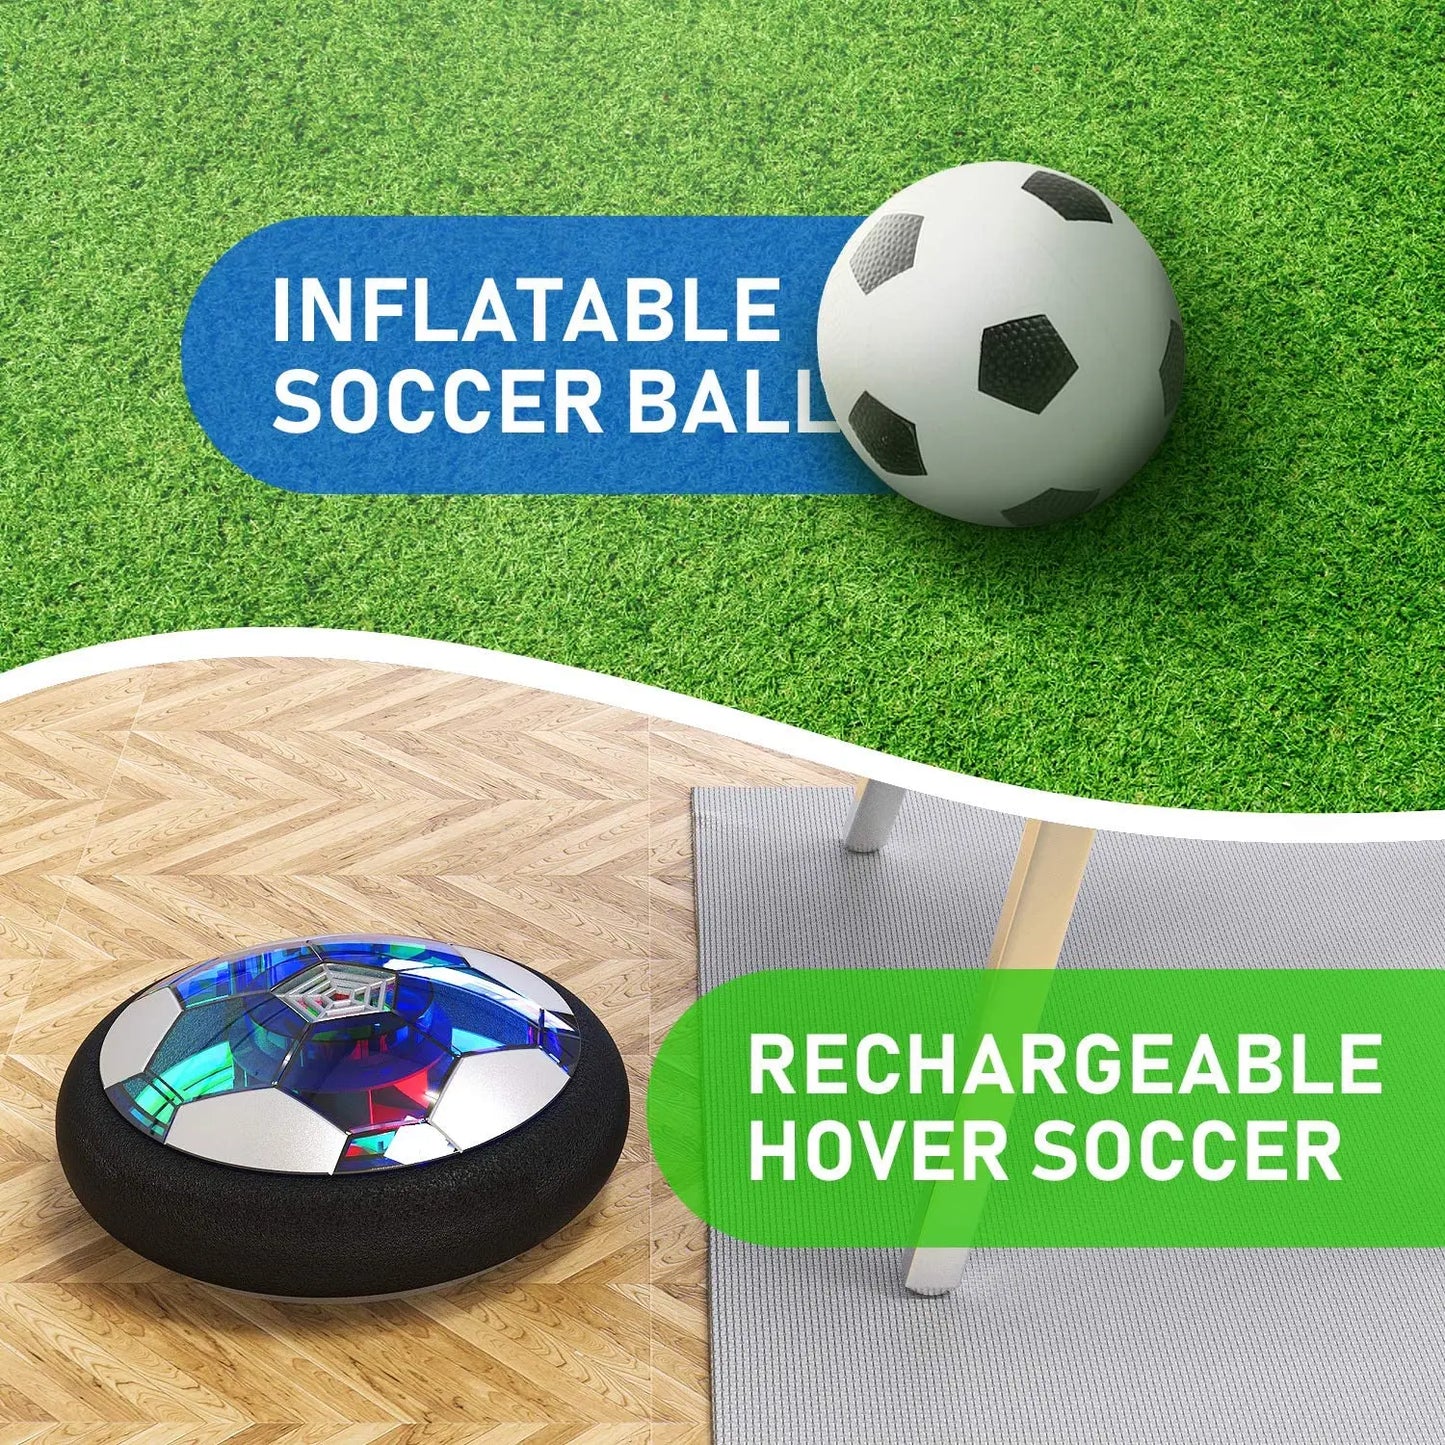 Kids Toys Hover Soccer Ball toys Rechargeable Air Soccer Ball Indoor Floating Soccer with LED Light  Christmas Gift for Kids